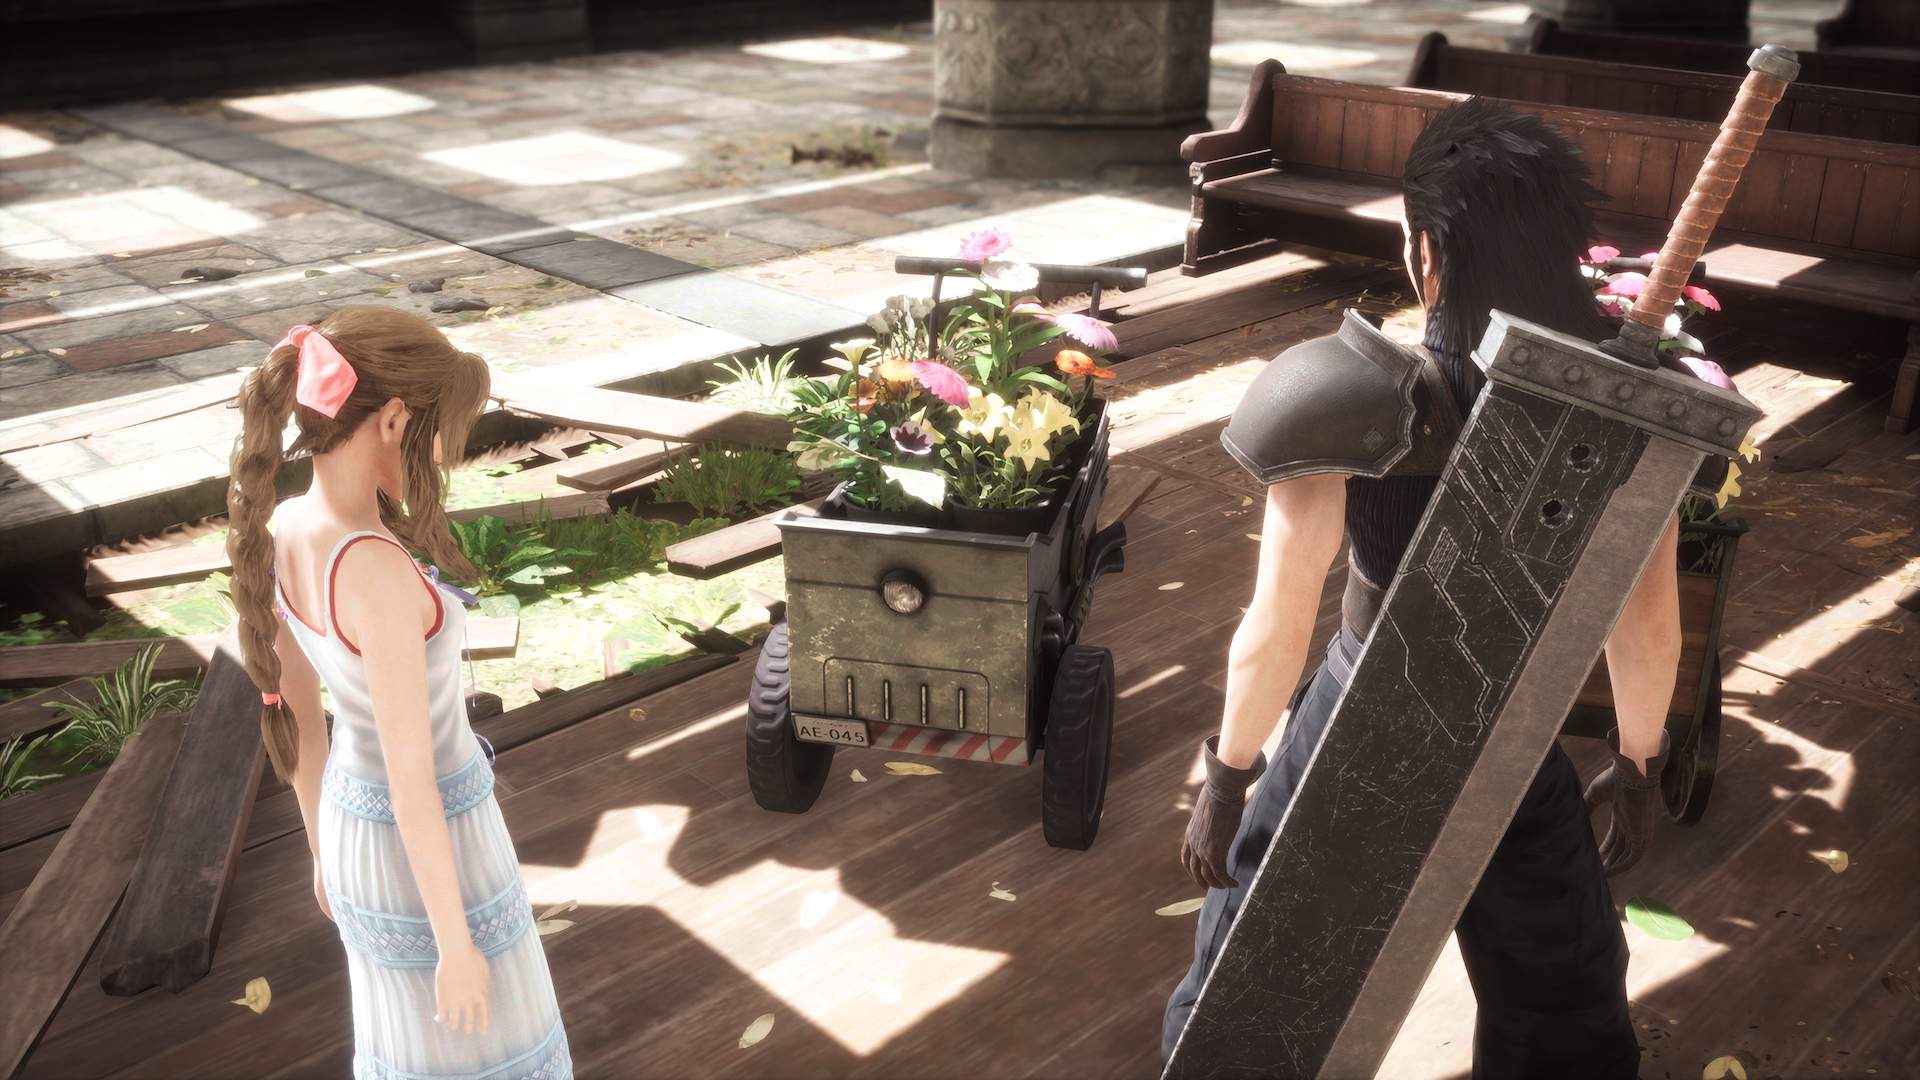 Zack and Aerith building a flower wagon